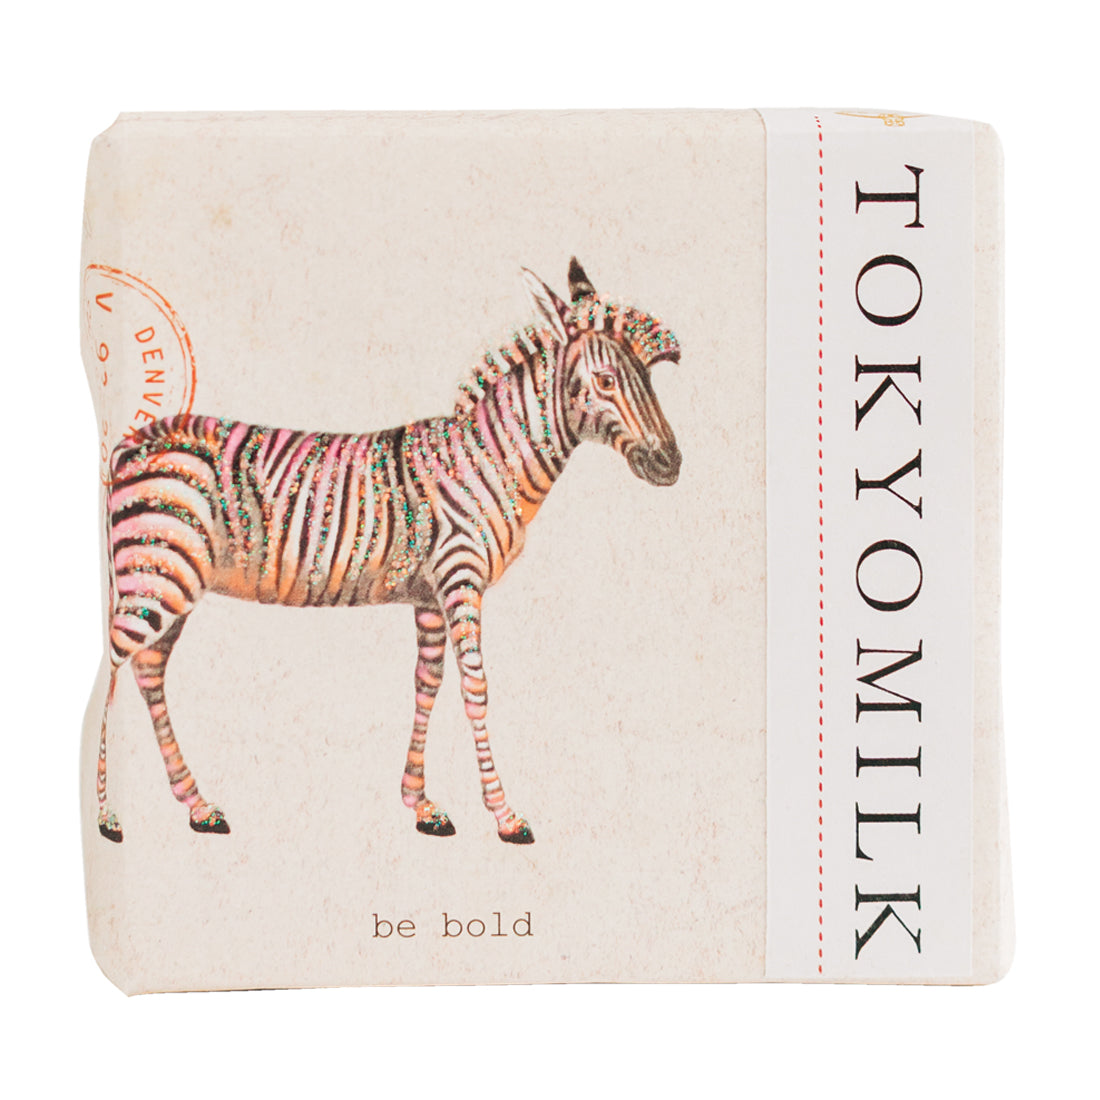 A notebook with an illustrated zebra featuring colorful stripes on a beige background. The words "be bold" and "Margot Elena TokyoMilk Finest Perfumed Soap - Be Bold (Zebra)" are printed on it.